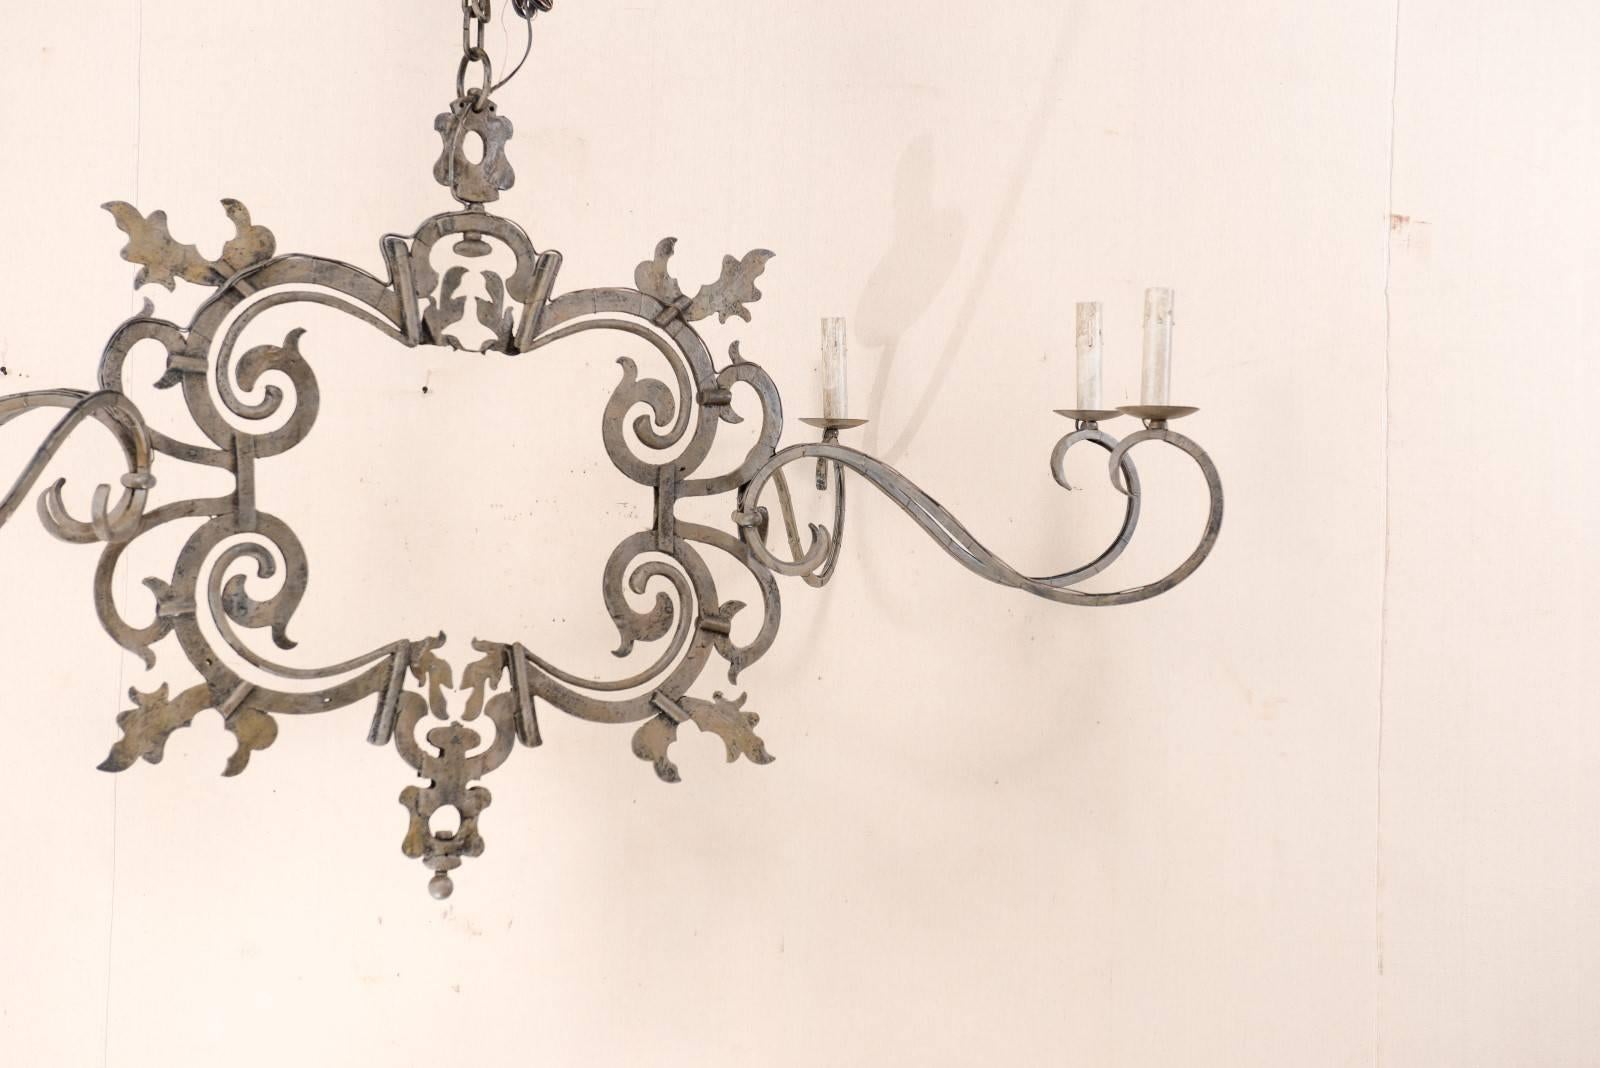 18th Century and Earlier Large Italian Painted Iron Chandelier with 18th Century Scrolling Iron Work